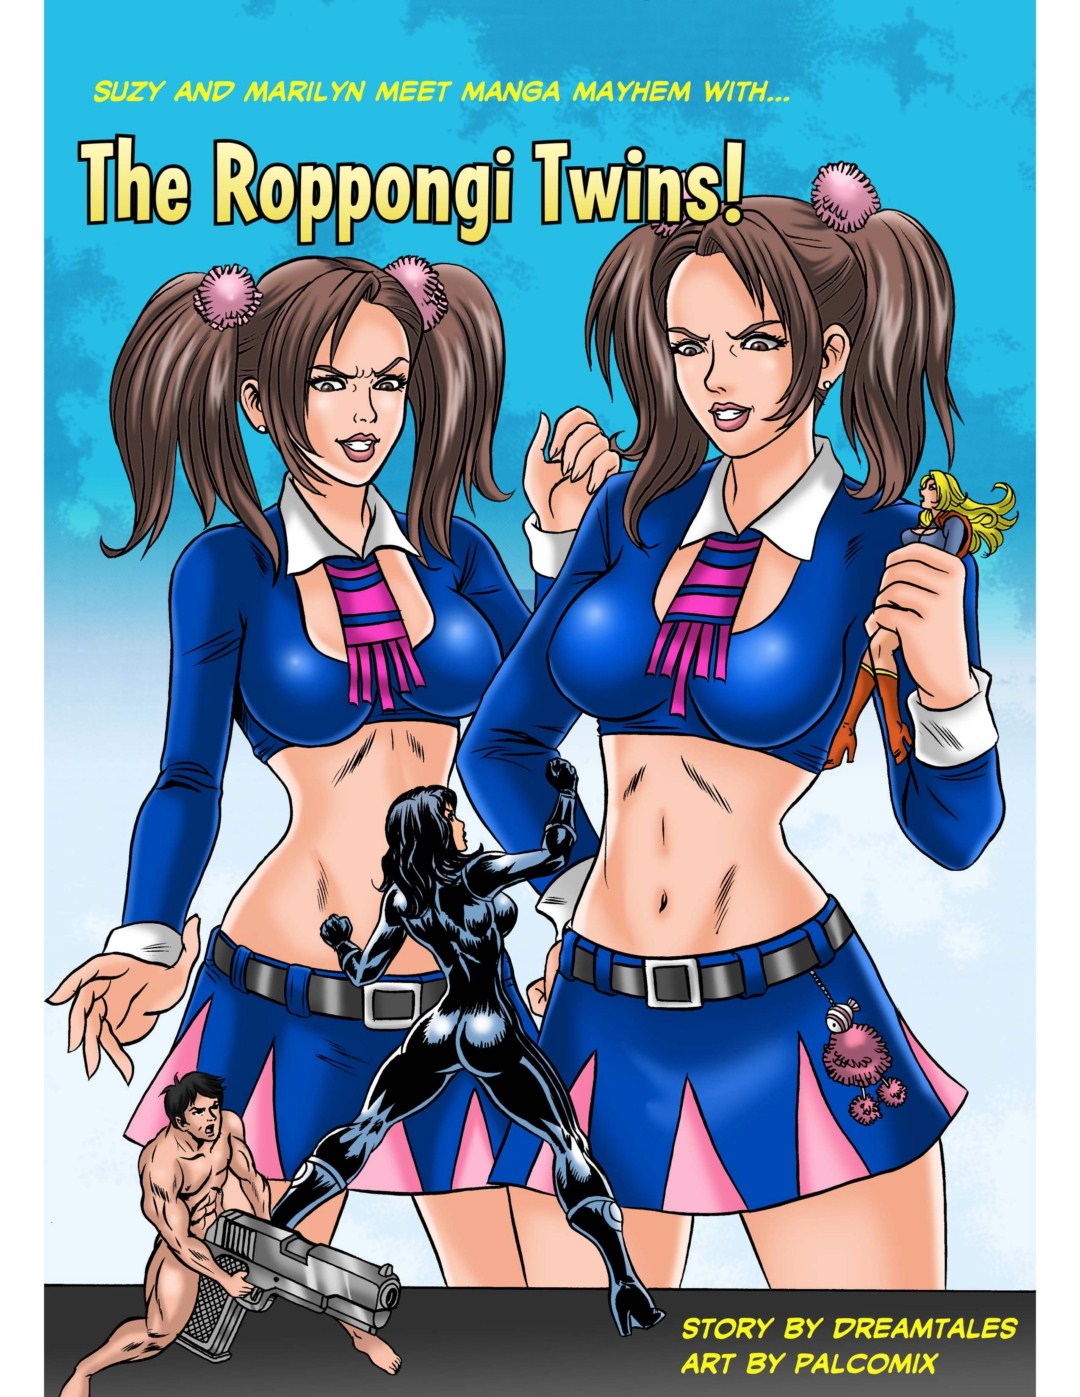 PALCOMIX – THE ROPPONDY TWINS